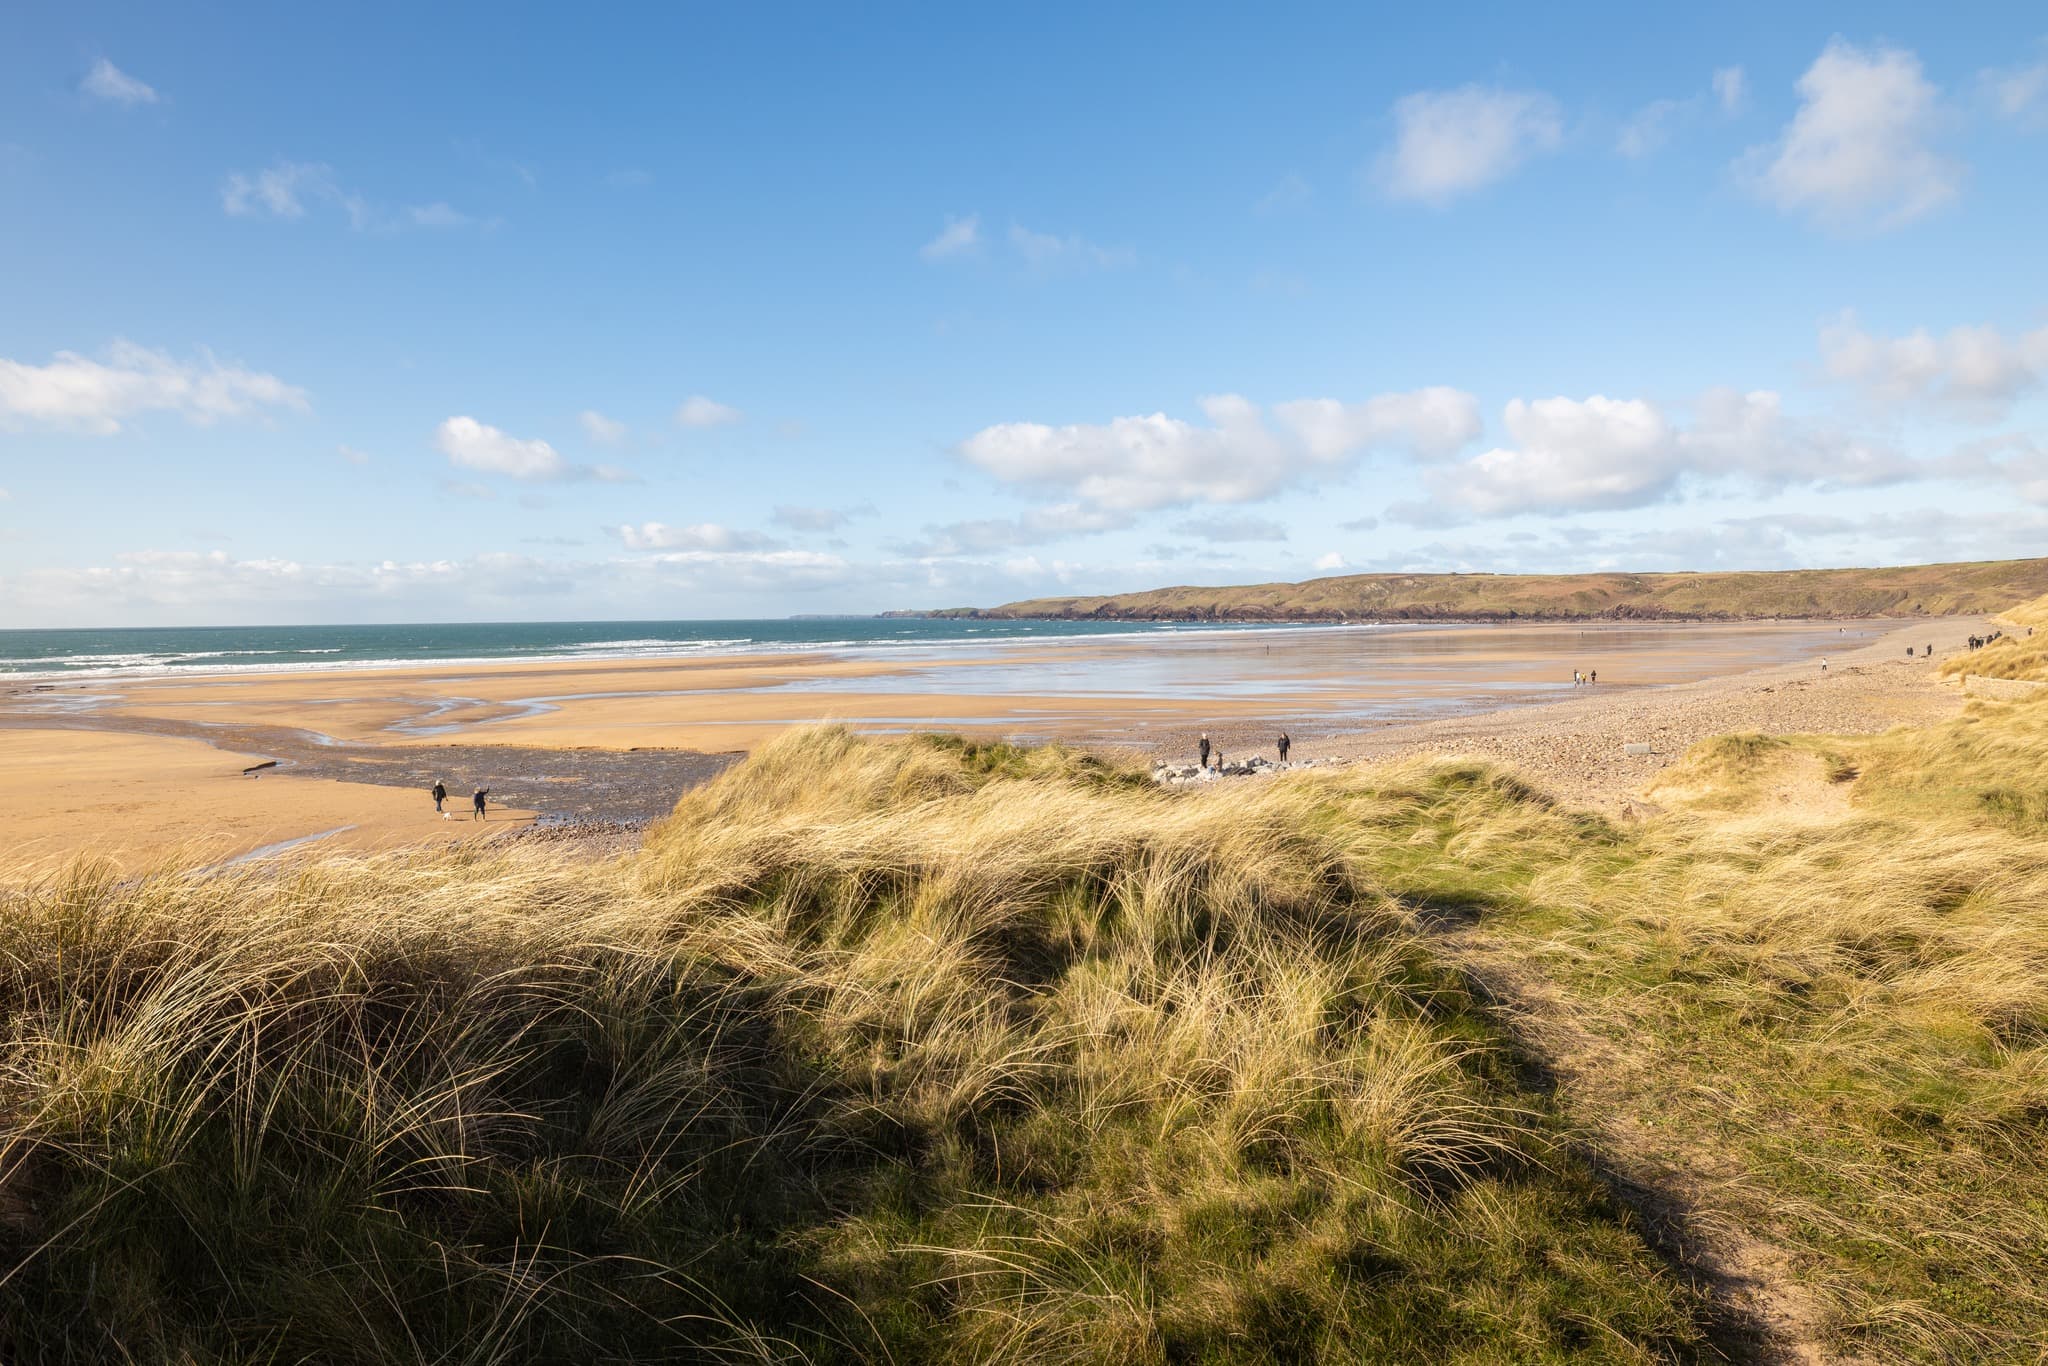 📍Freshwater West

Visiting Bluestone this summer? Well, you’ll be happy to know there are over FIFTY beautiful beaches right on our doorstep, including this gem, named Wales’ best beach by @thetimes! 🏖️ 

Golden sands and rolling dunes make for a perfect day out soaking up that summer sun ☀️

#MyBluestoneBreak #Pembrokeshire #PembrokeshireBeaches #SummerBreaks #FreeRangeFun